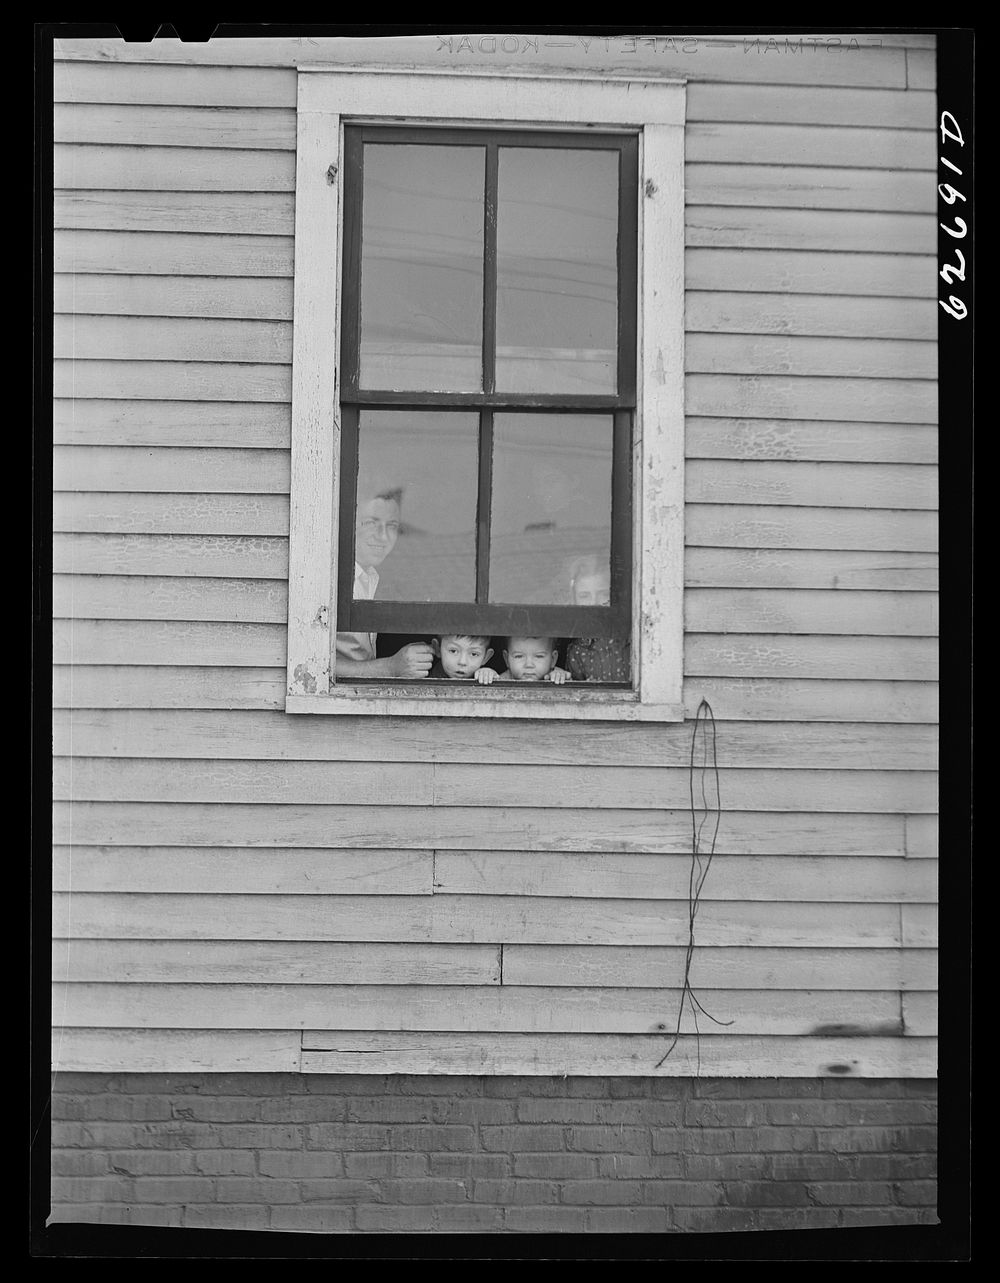 House near Navy yard. Portsmouth, Virginia. Sourced from the Library of Congress.